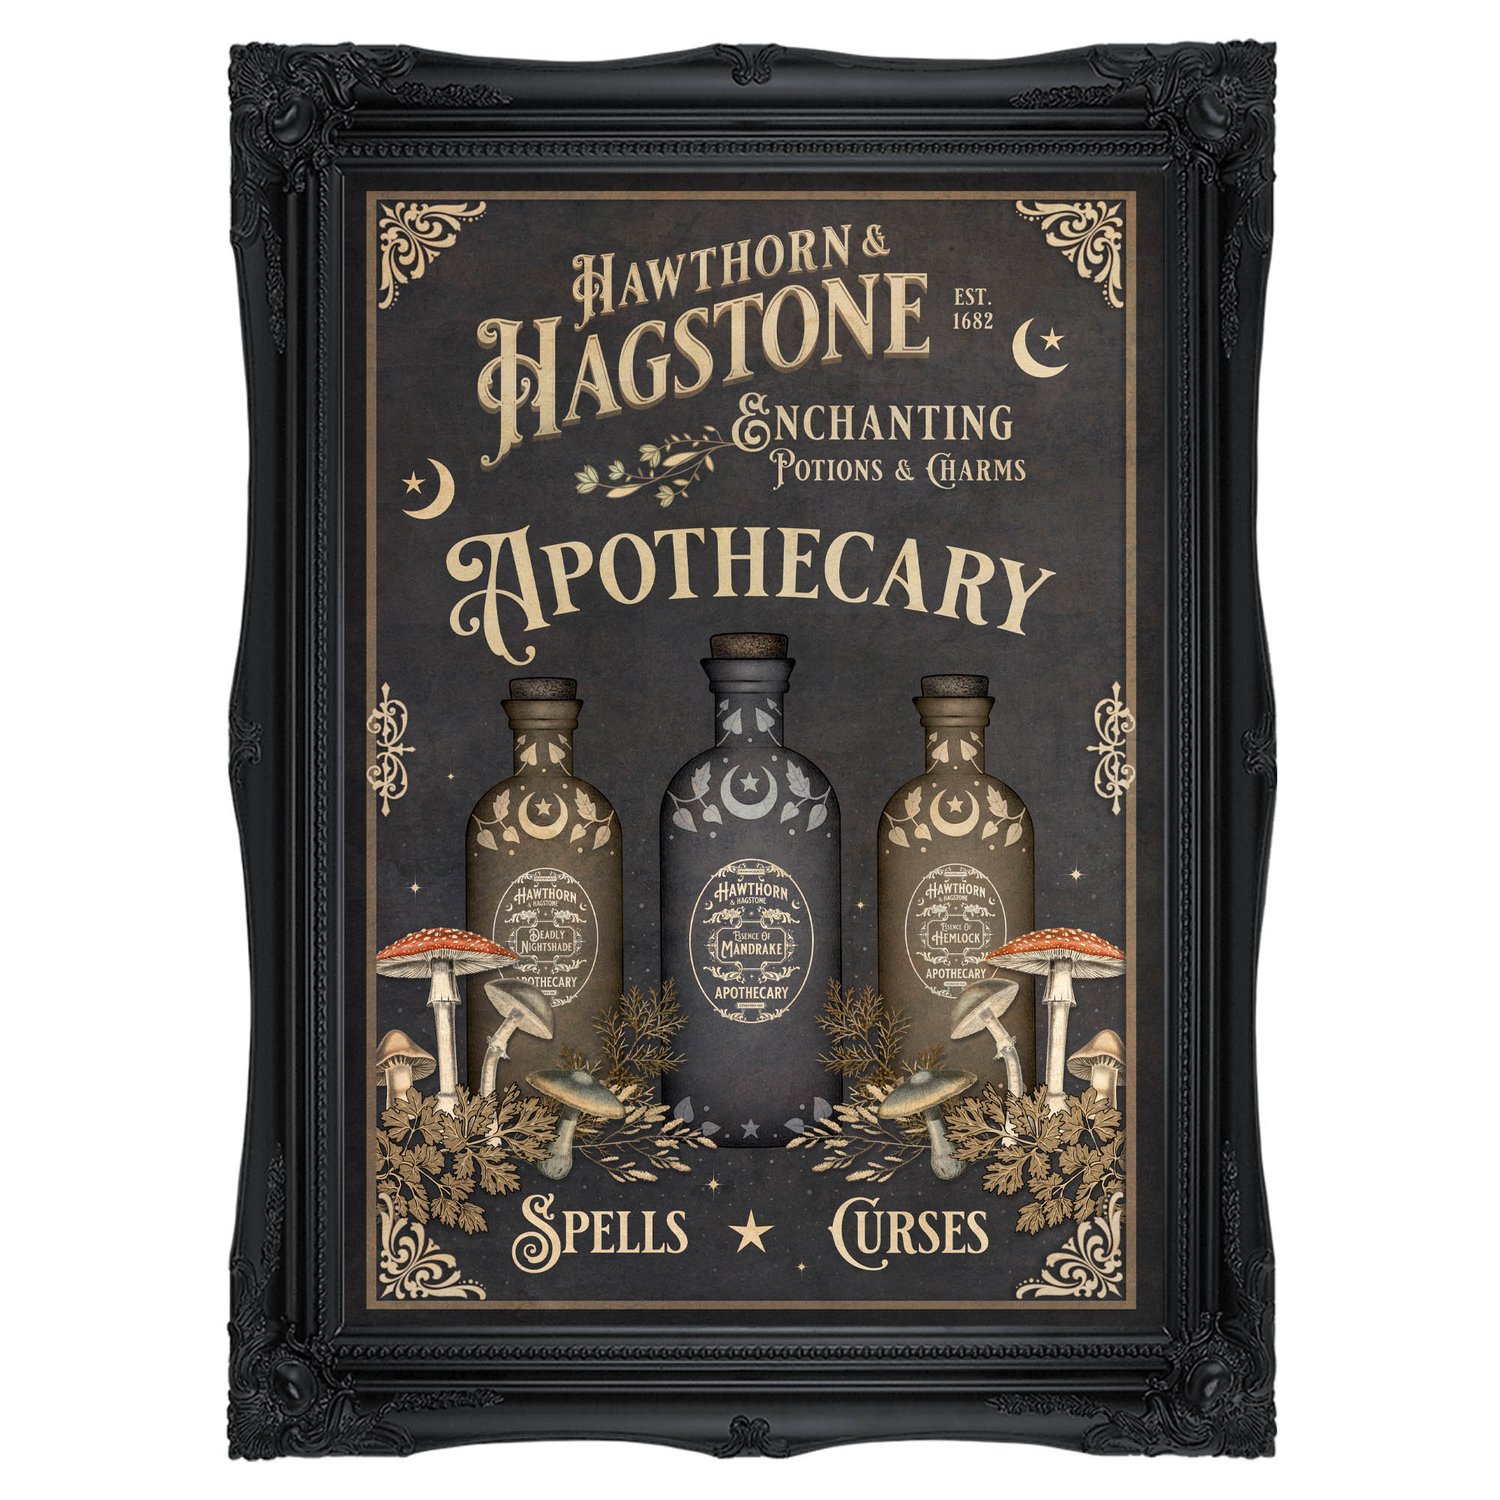 Vintage apothecary sign - Hawthorn & Hagstone with apothecary bottles and  wild mushrooms — Reliquary & Curios